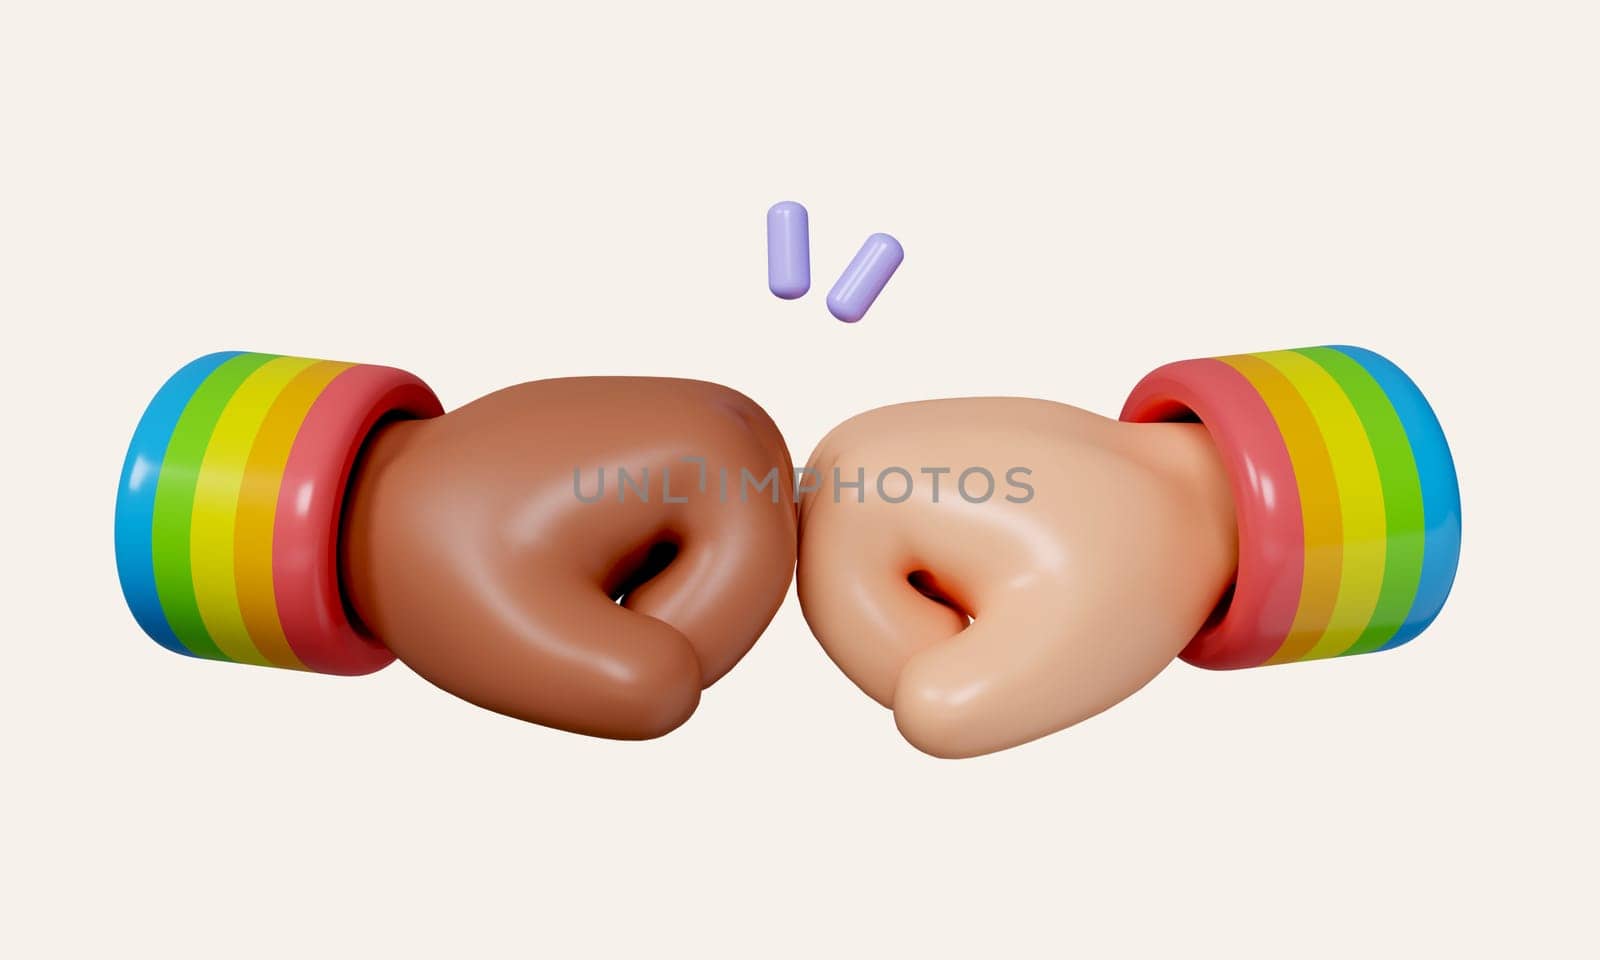 3d of Two Hands with Different Skin Color Fists Punching each other, LGBT Pride Month Icon. icon isolated on white background. 3d rendering illustration. Clipping path. by meepiangraphic